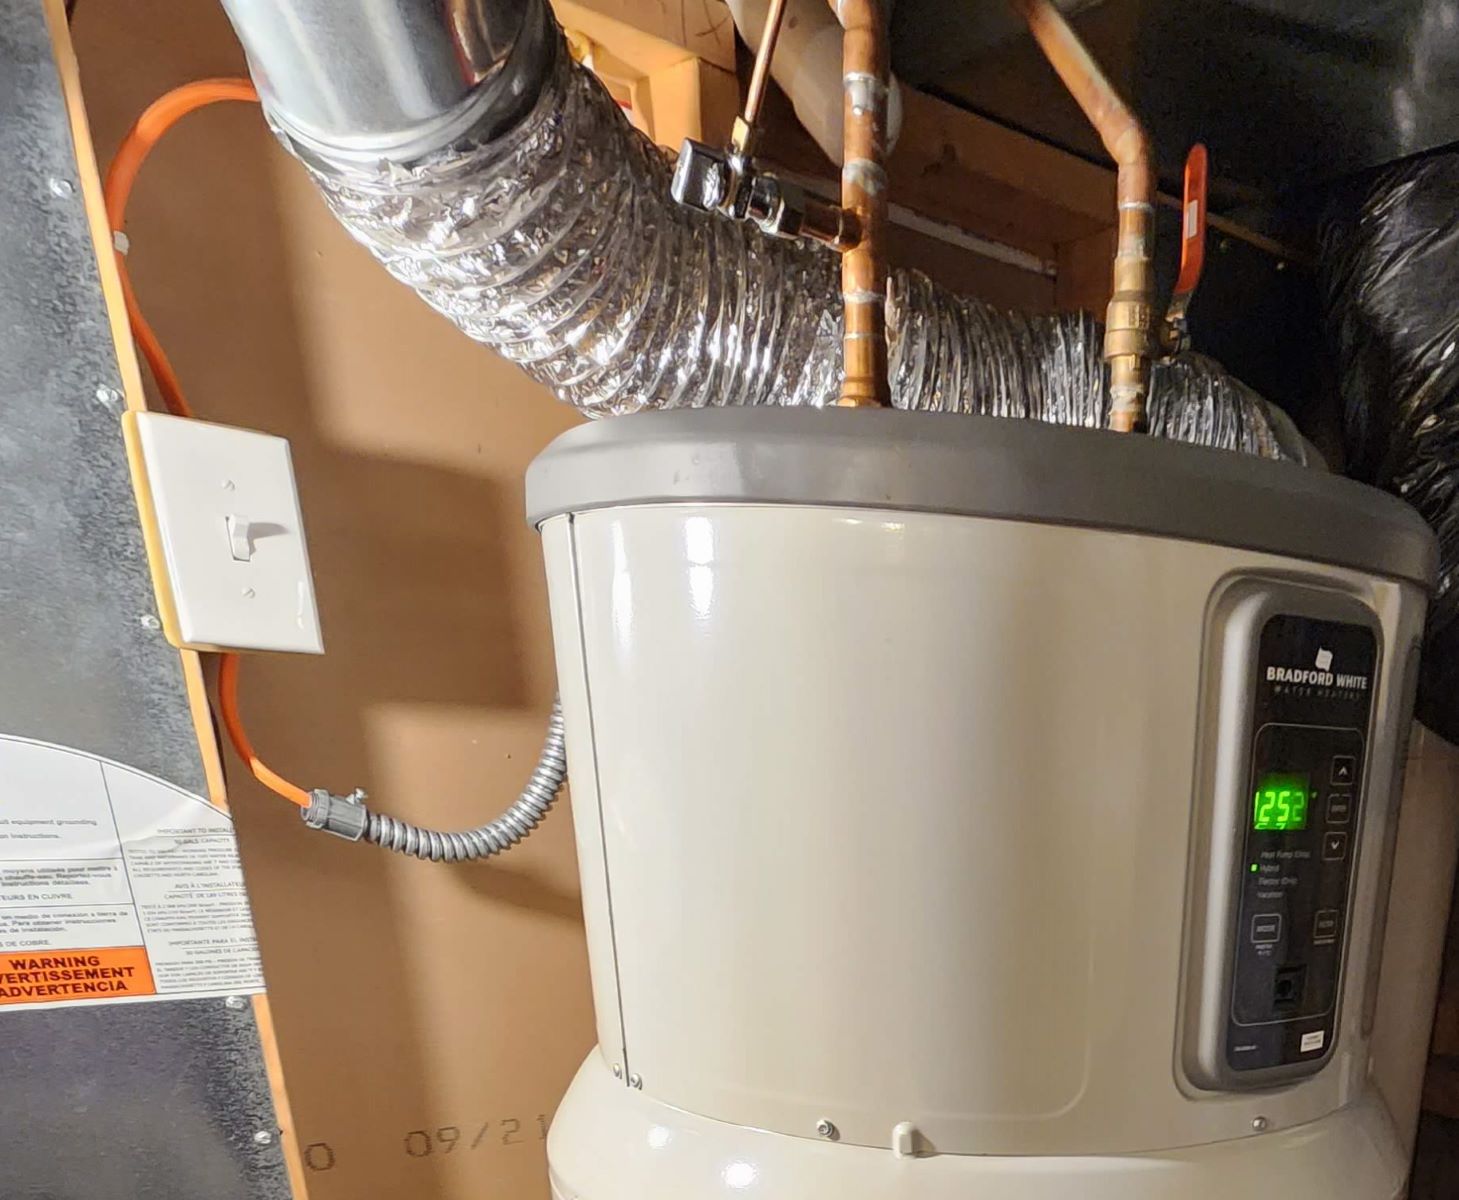 Discover The Amps Of A 4500 Watt Water Heater!